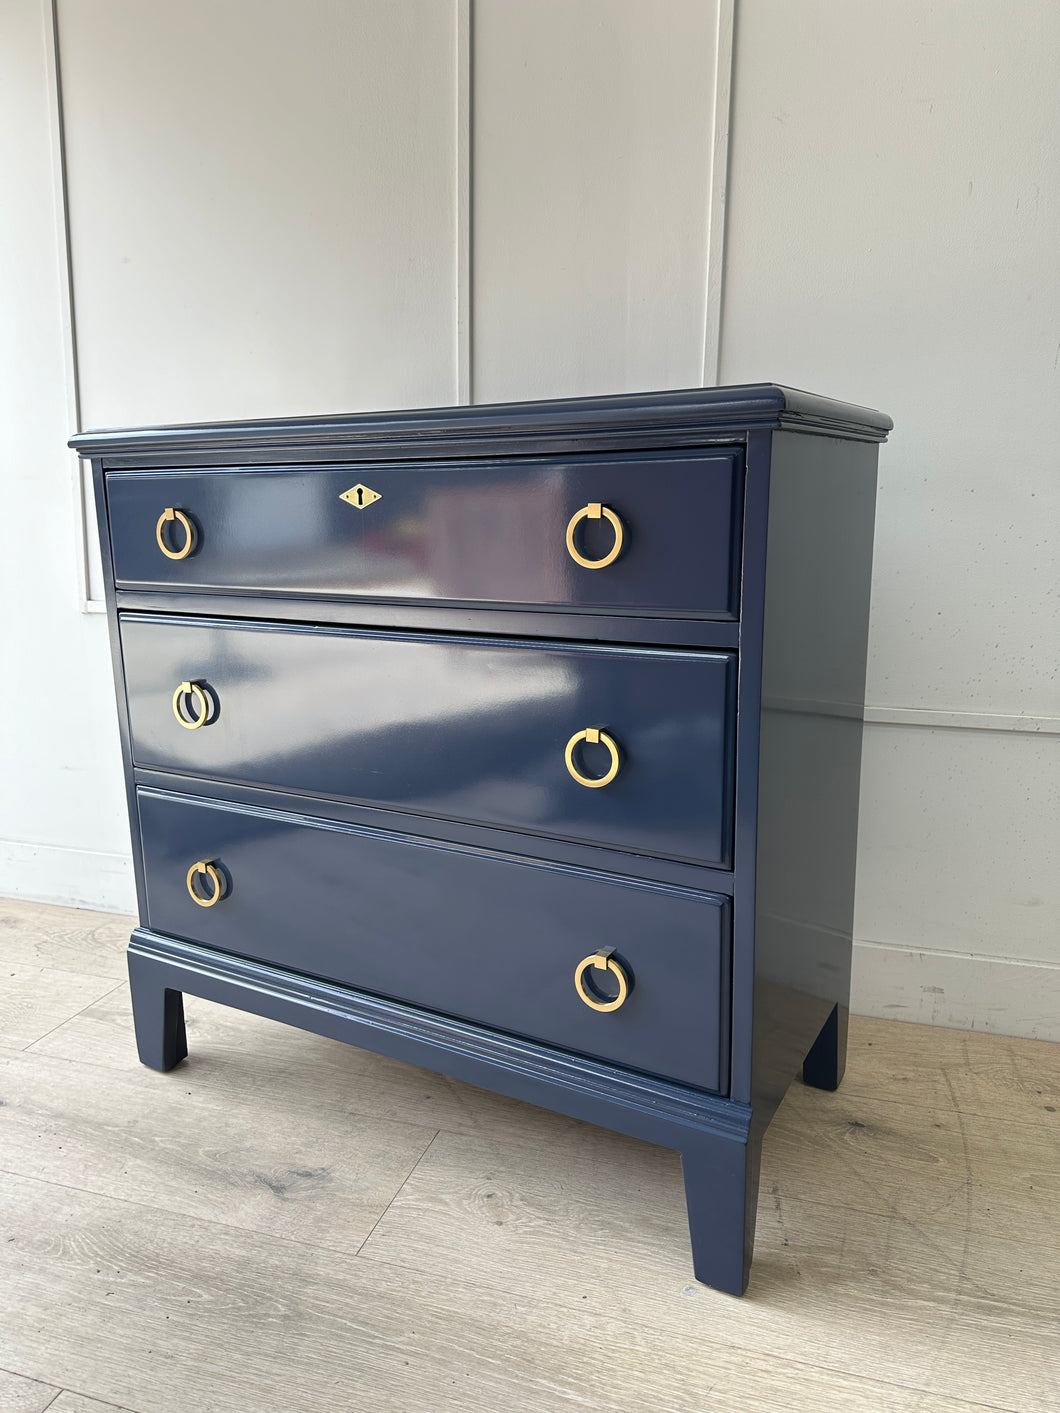 Antique 3 Drawer Chest in Naval